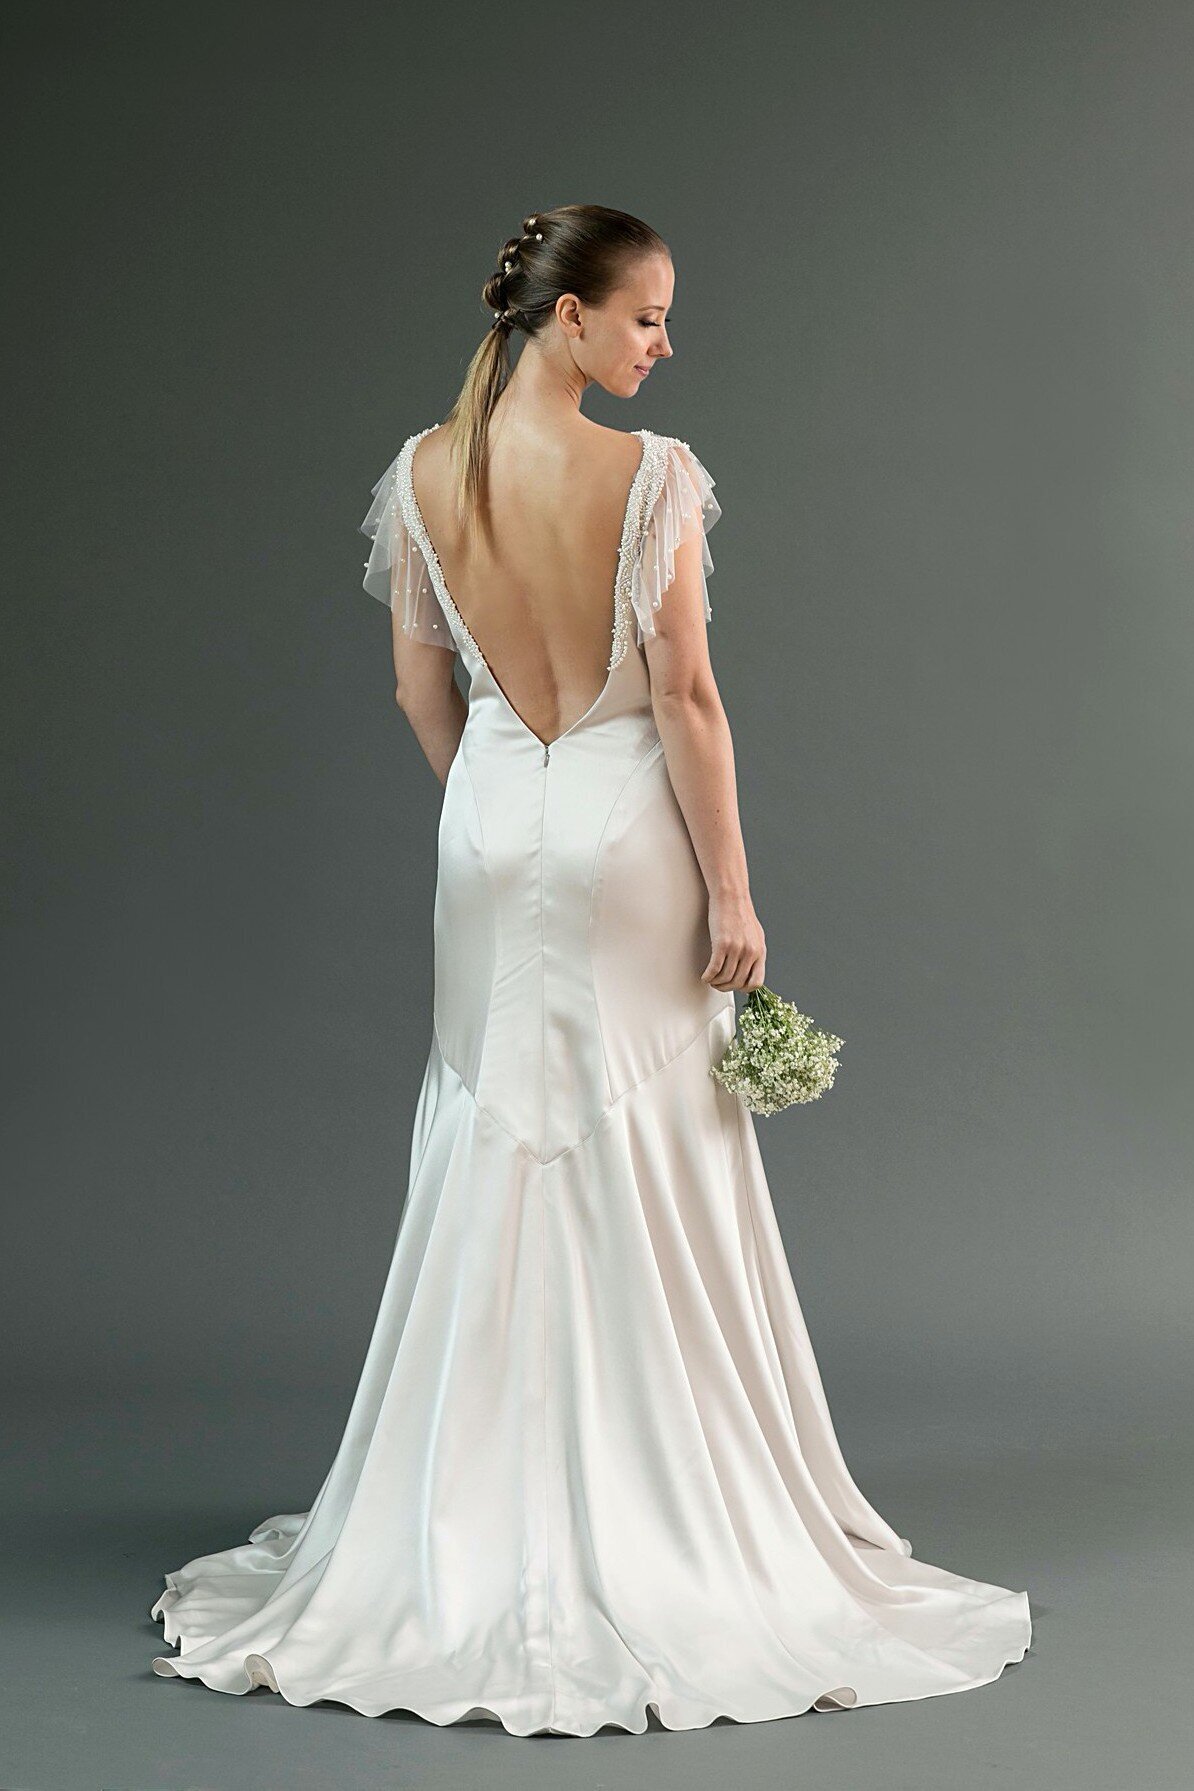 The low open-back wedding dress features a trumpet silhouette in a shiny charmeuse fabric. It's shown in silver, but available in white.